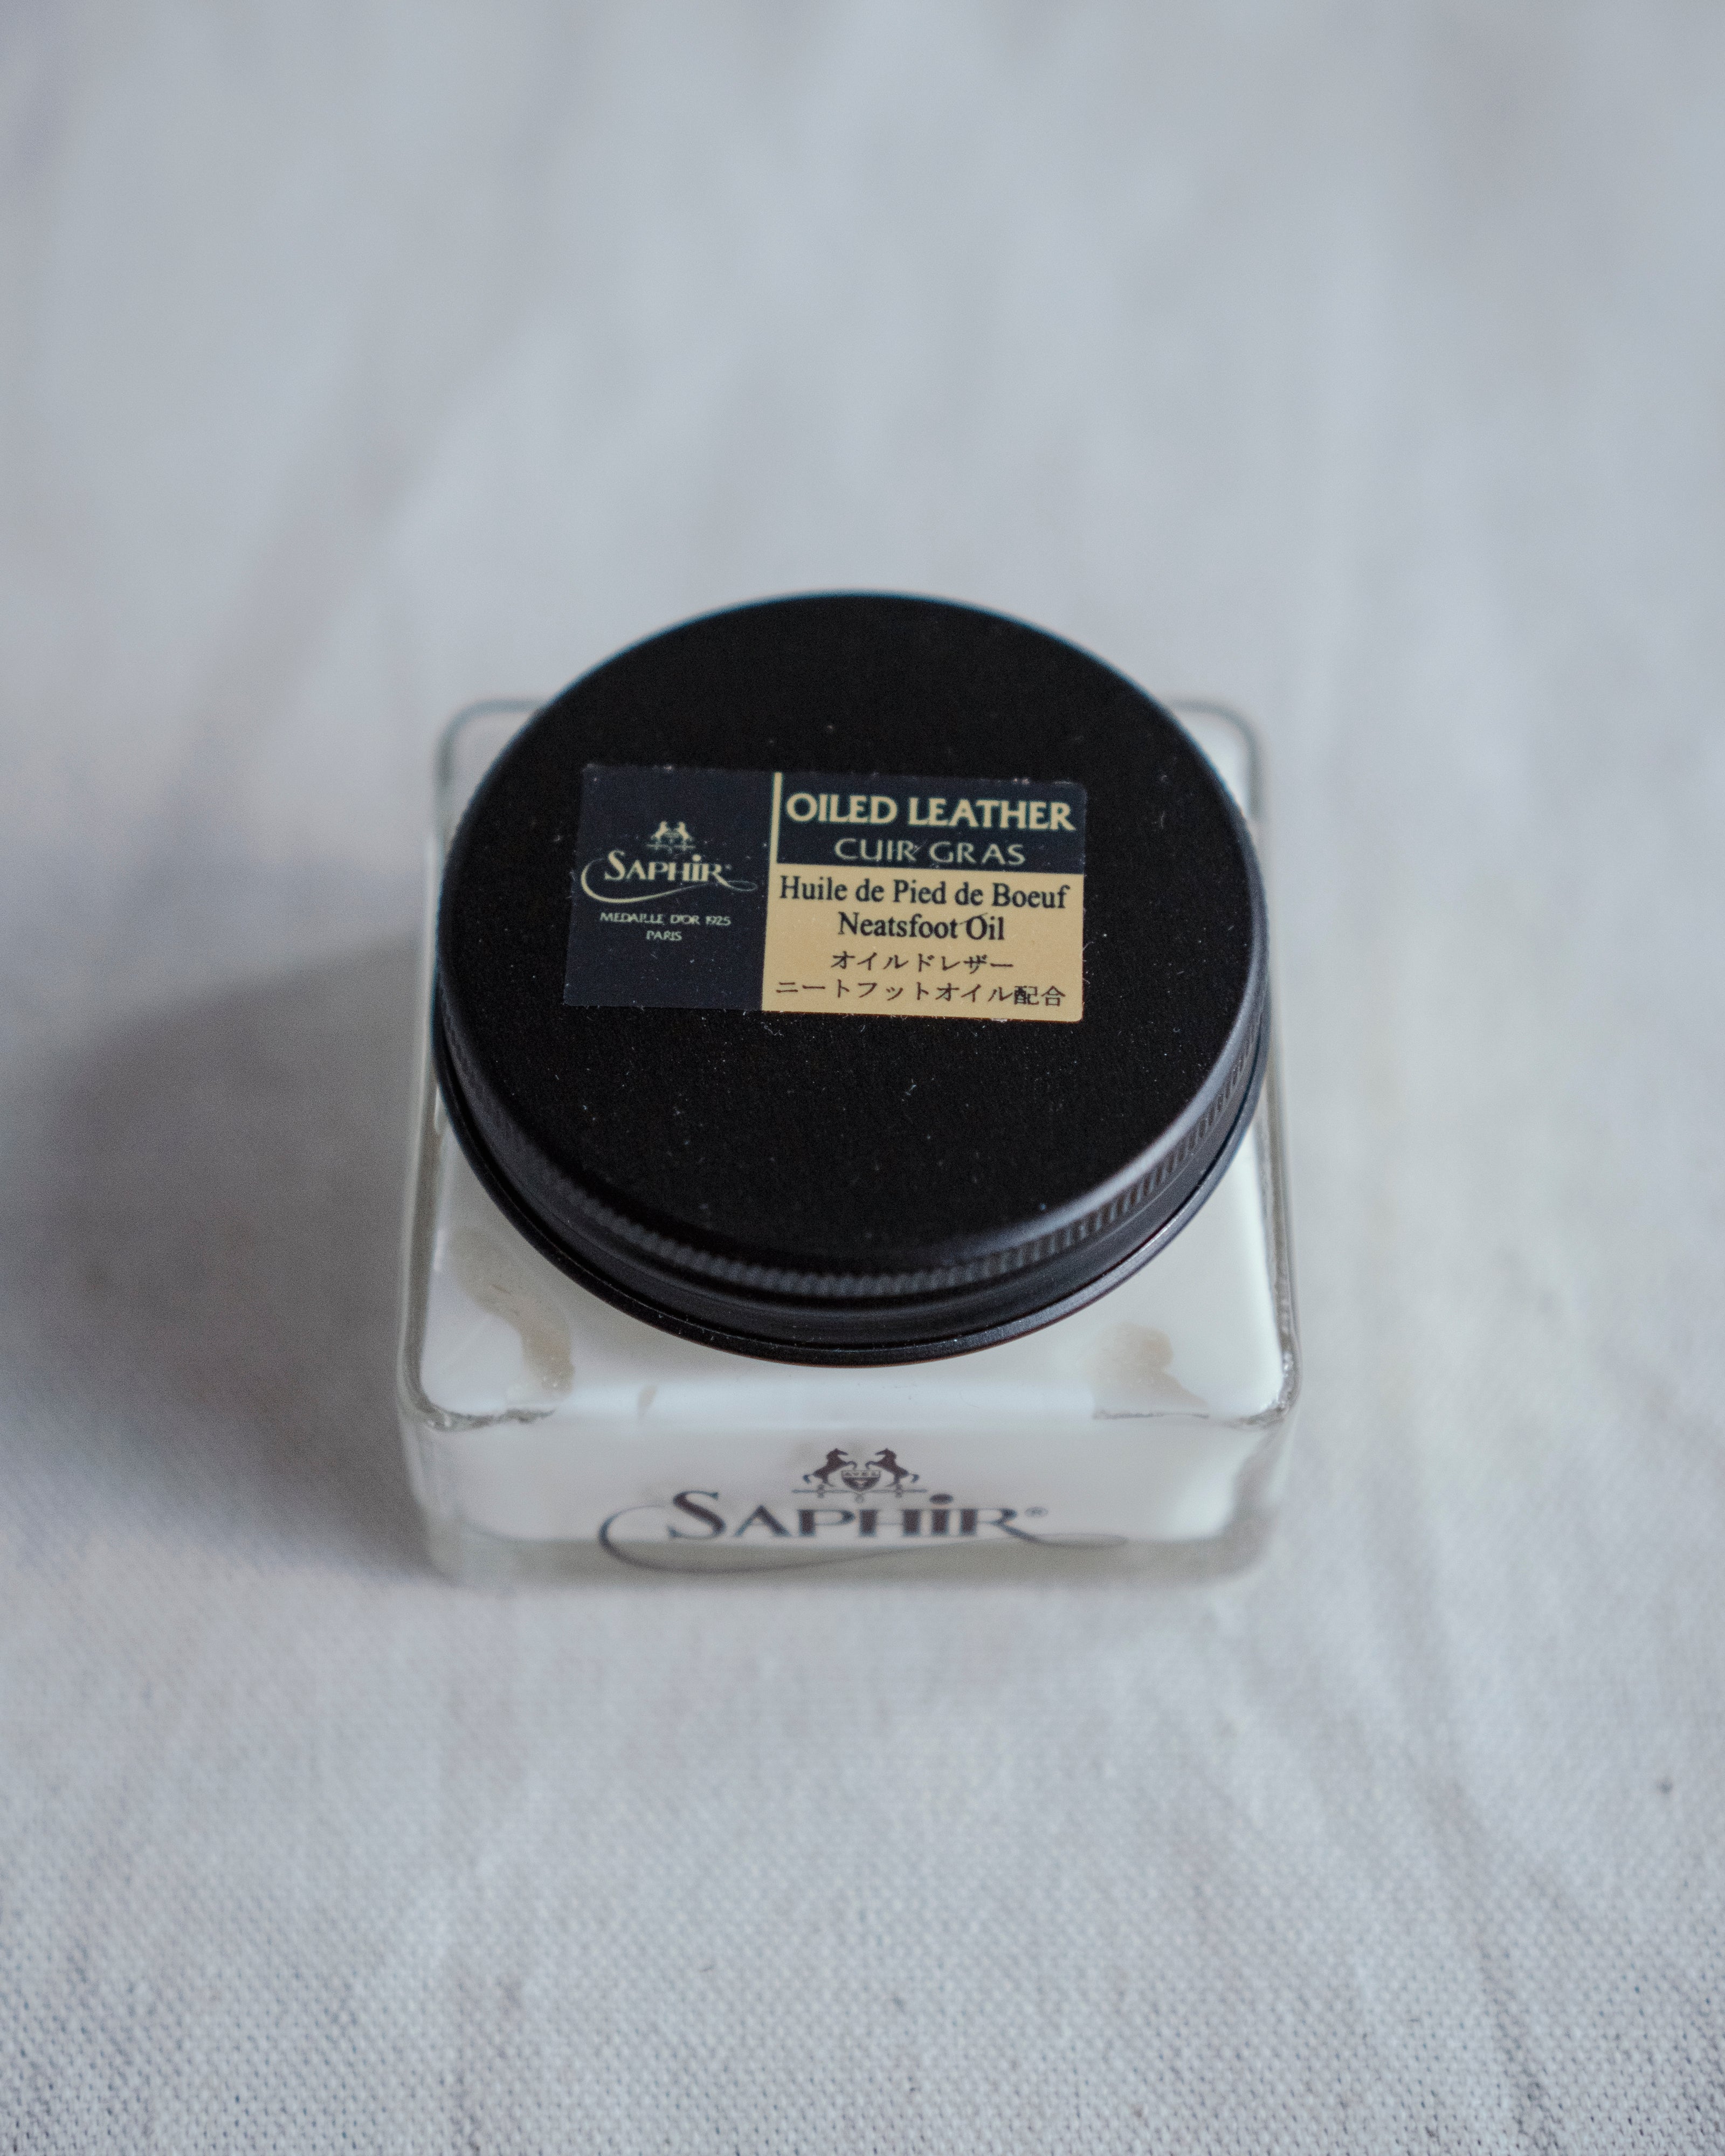 MDO Oil Leather Creme, Saphir - The Signet Store